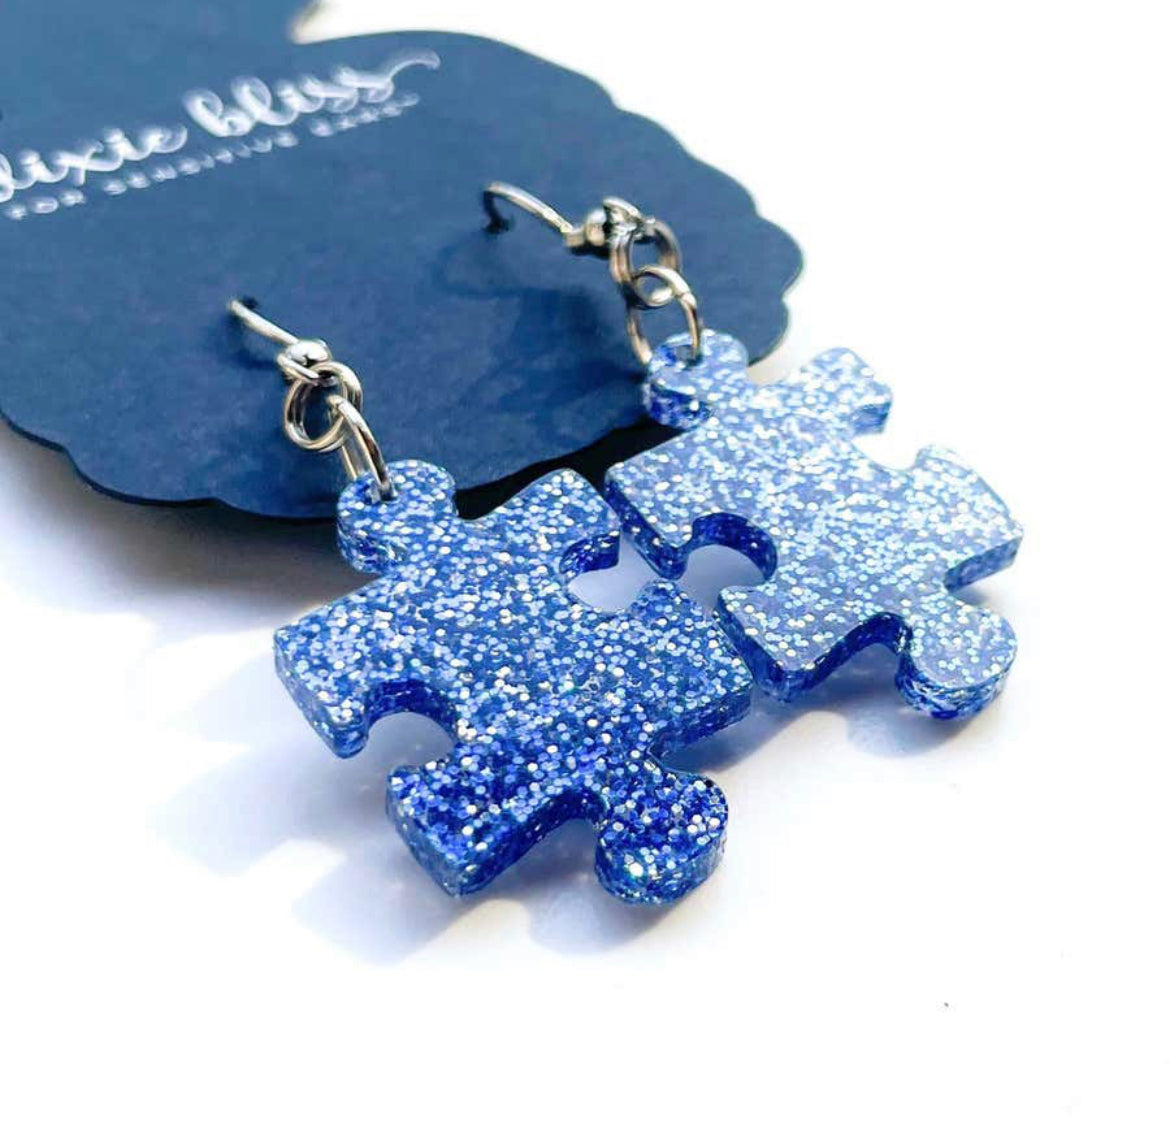 Puzzle Pieces in Blue Glitter - Dixie Bliss - Dangle Earring